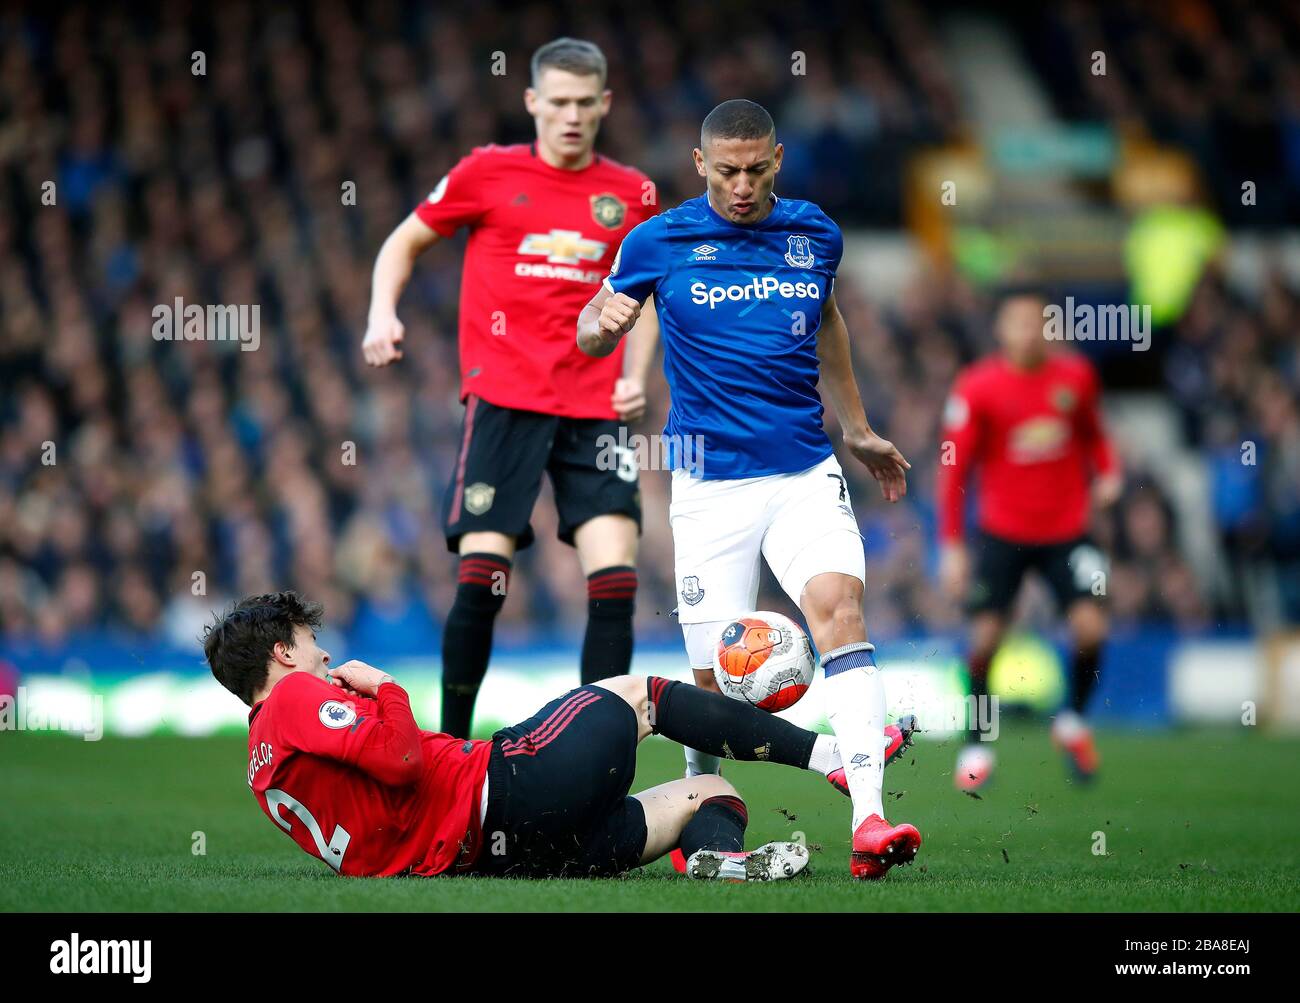 Everton's Richarlison (top) and Manchester United's Victor Lindelof battle for the ball Stock Photo